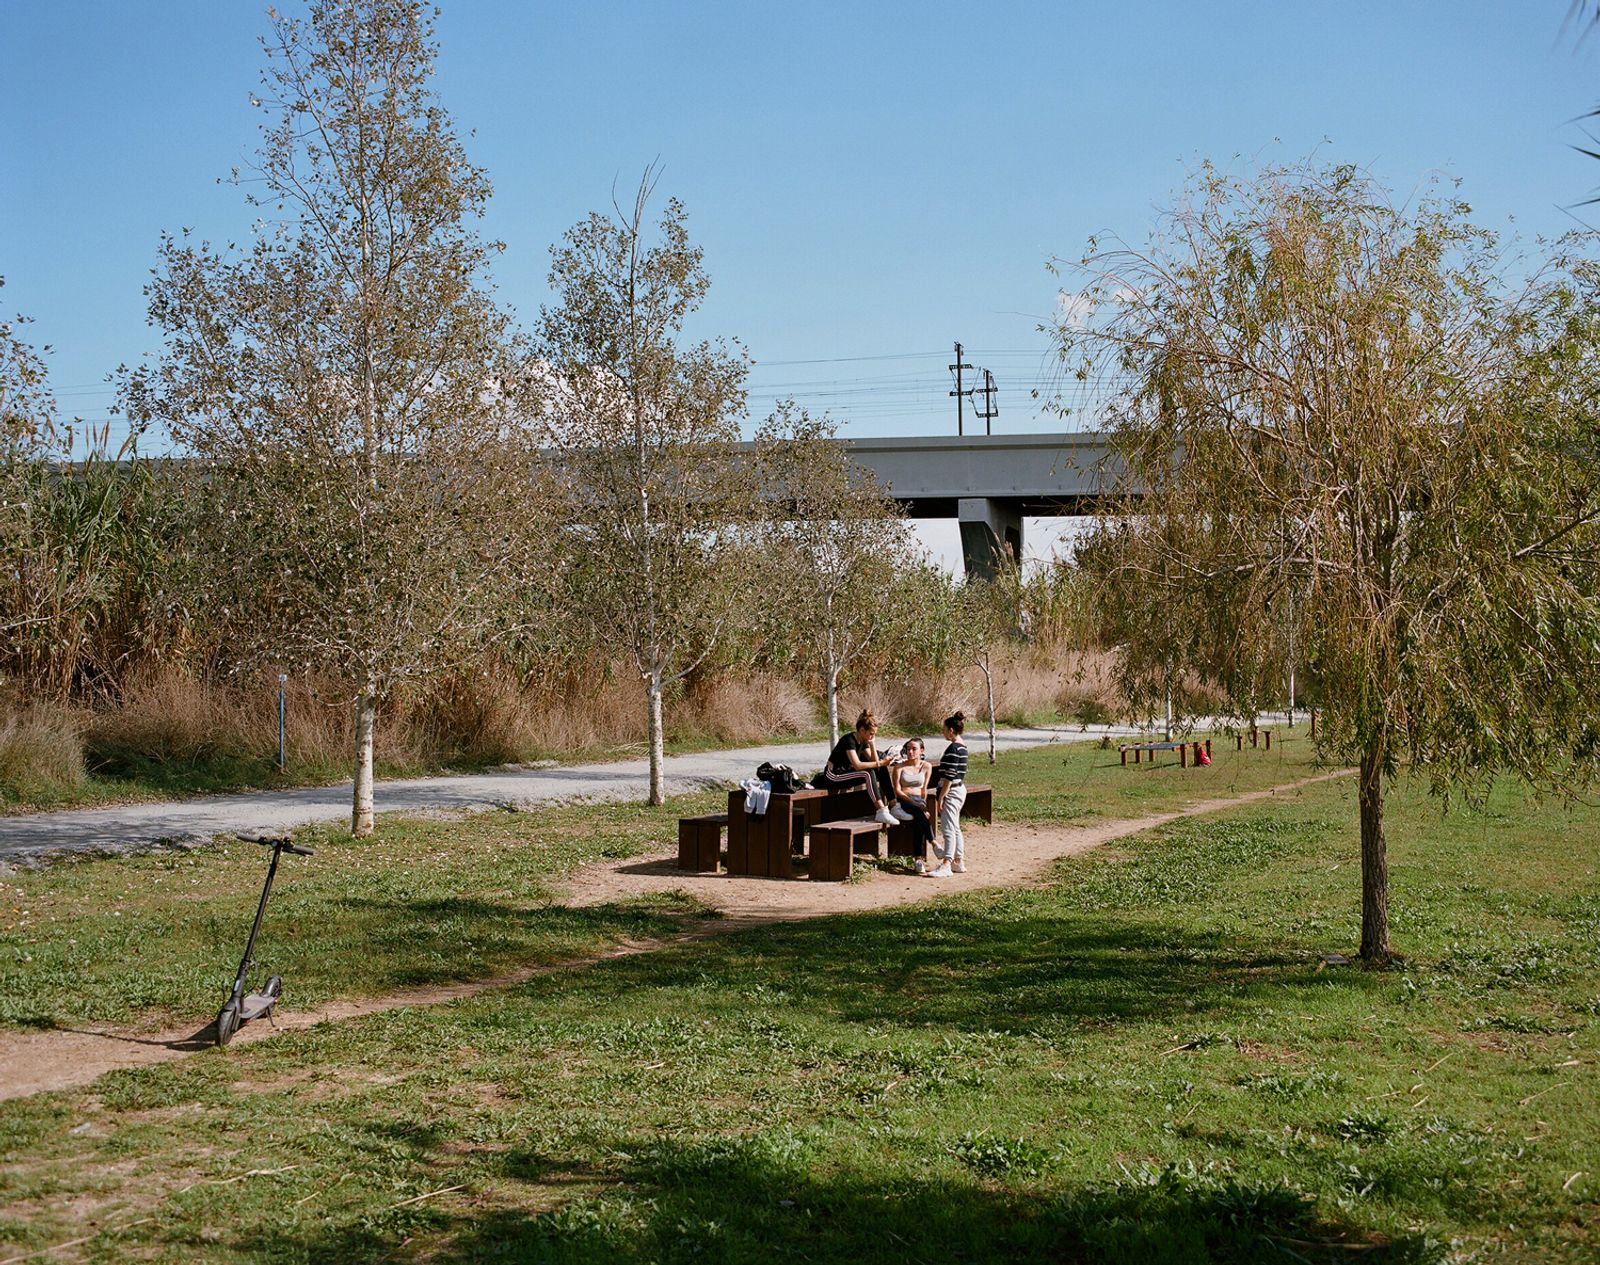 © Edgar dos Santos - Image from the Inventory of bridges and viaducts of the Spanish high-speed rail (AVE) photography project